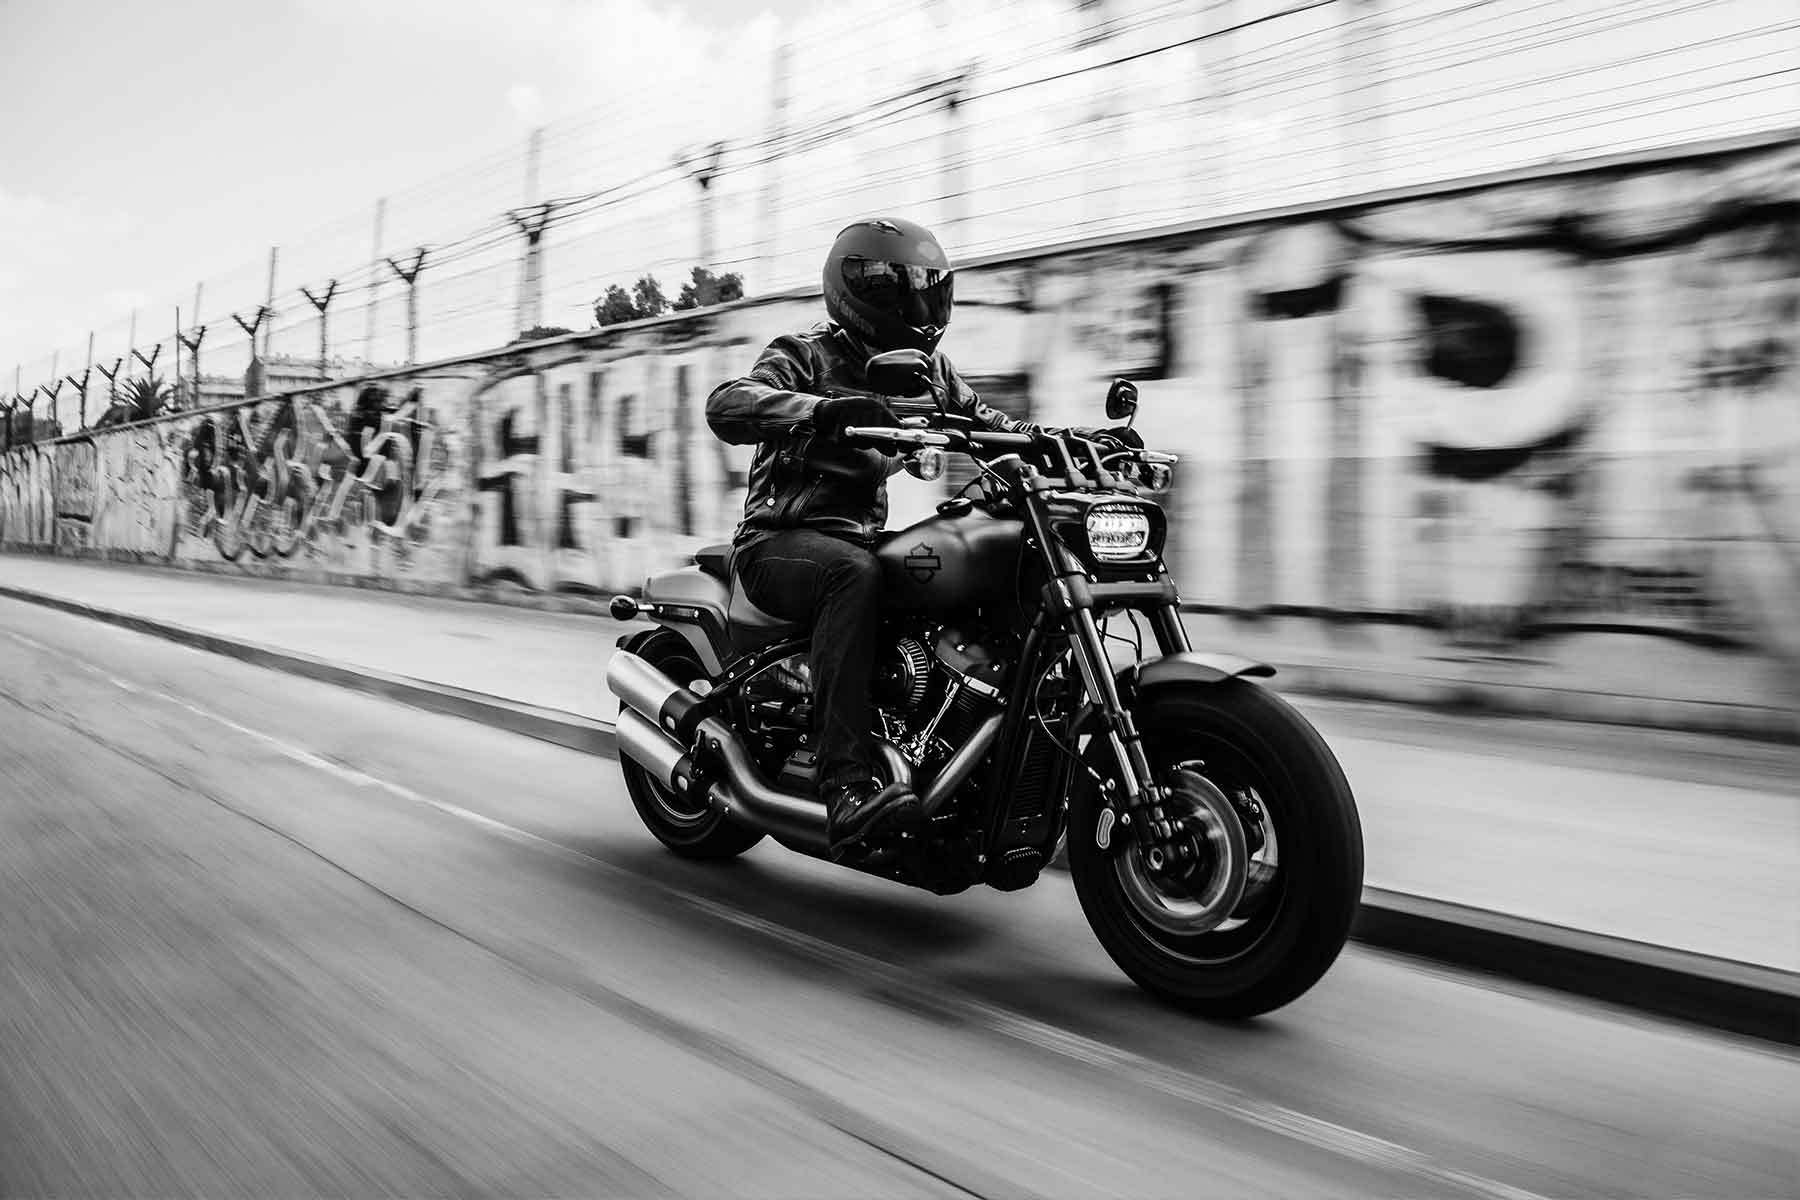 motorcycle accident lawyers